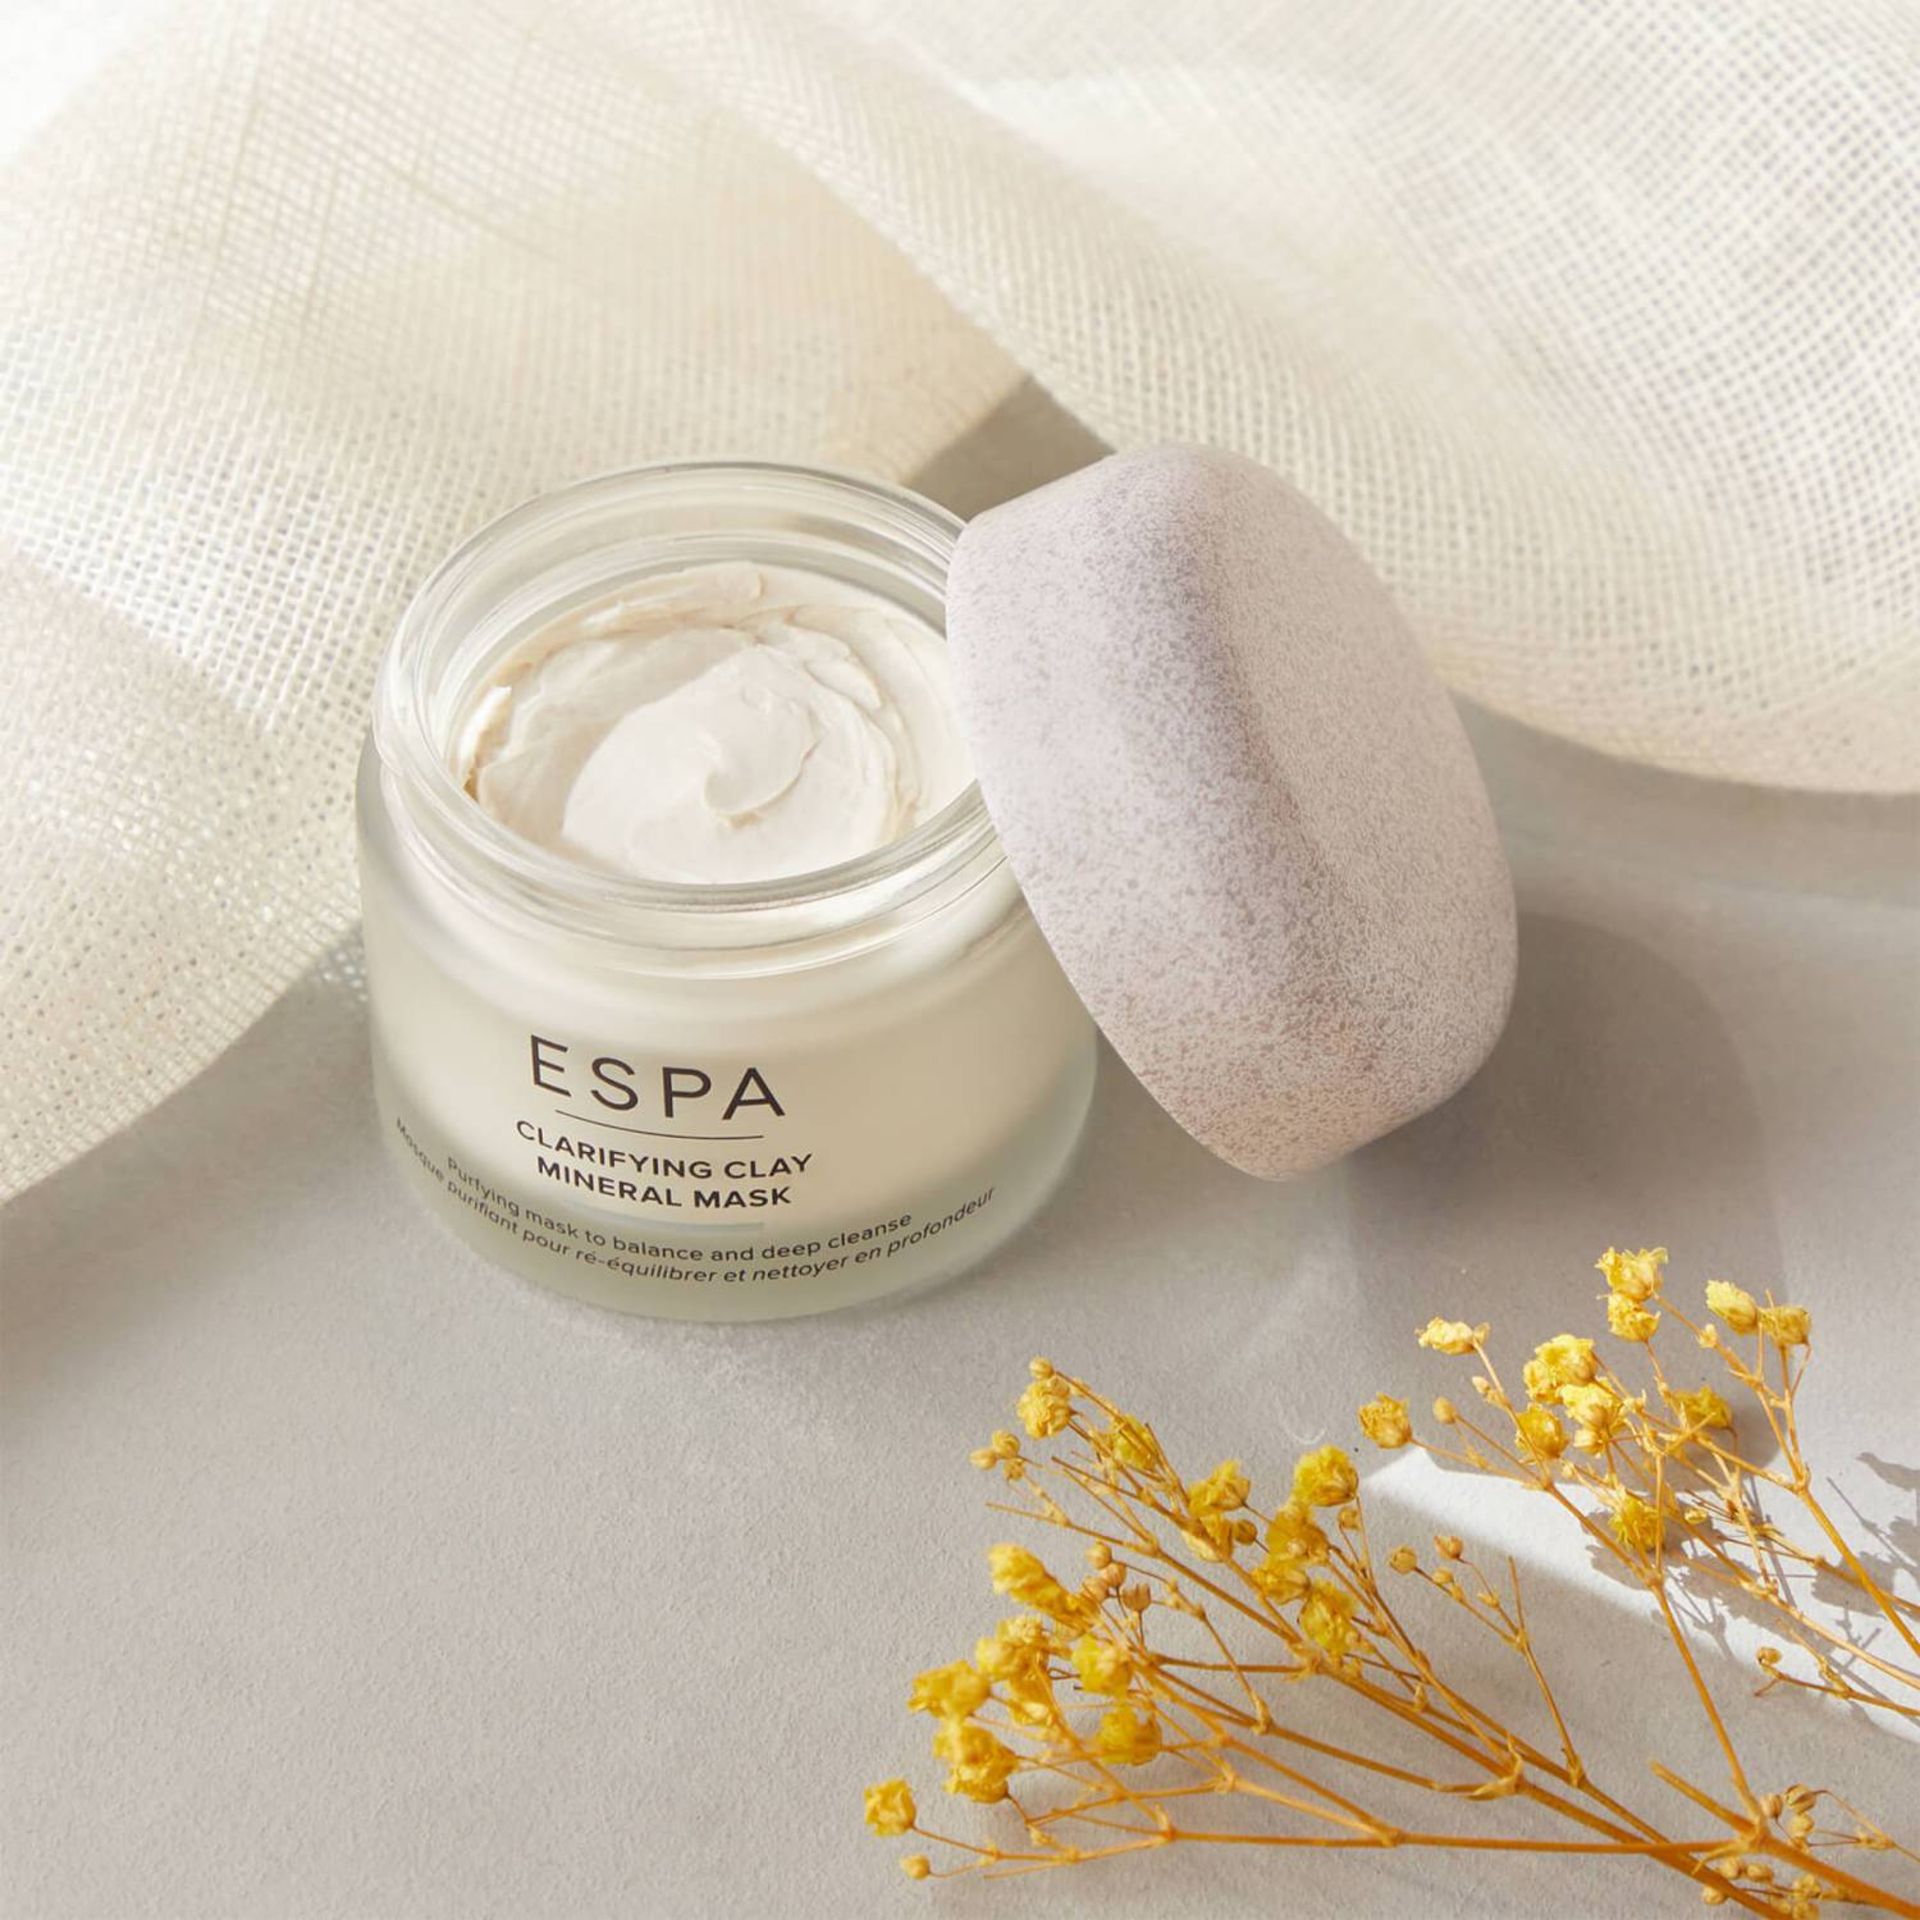 24 X ESPA CLARIFYING CLAY MINERAL MASK RRP £816 - Image 2 of 2